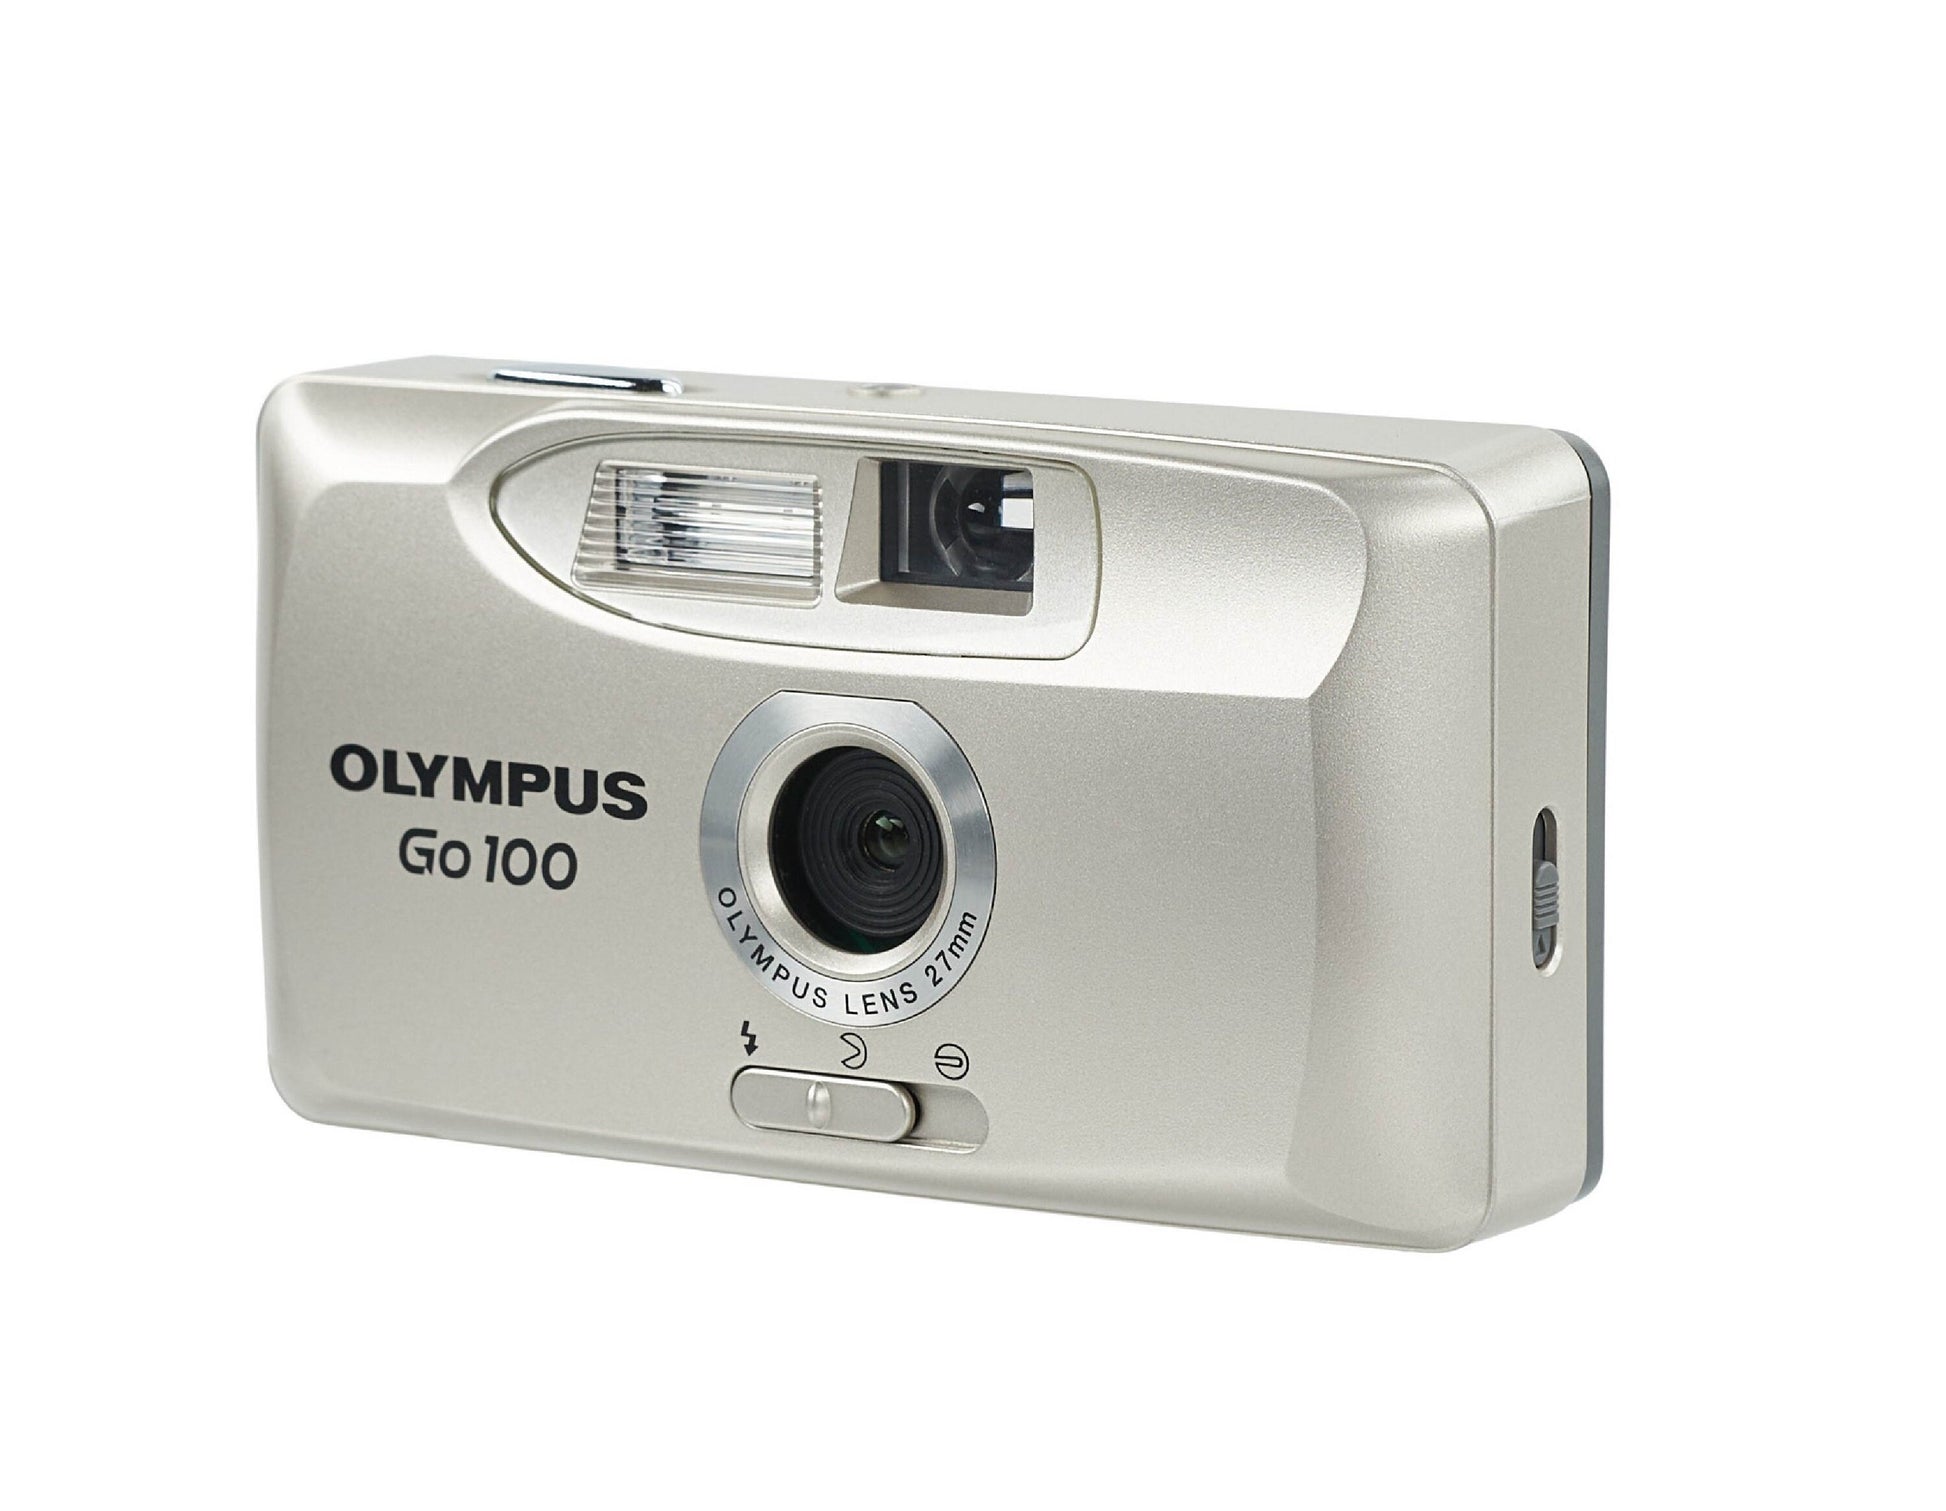 Olympus Go 100 Vintage Camera, Point and Shot Camera, Working Film Camera, Vintage Point & Shoot 35mm film camera - Vintage Polaroid Instant Cameras